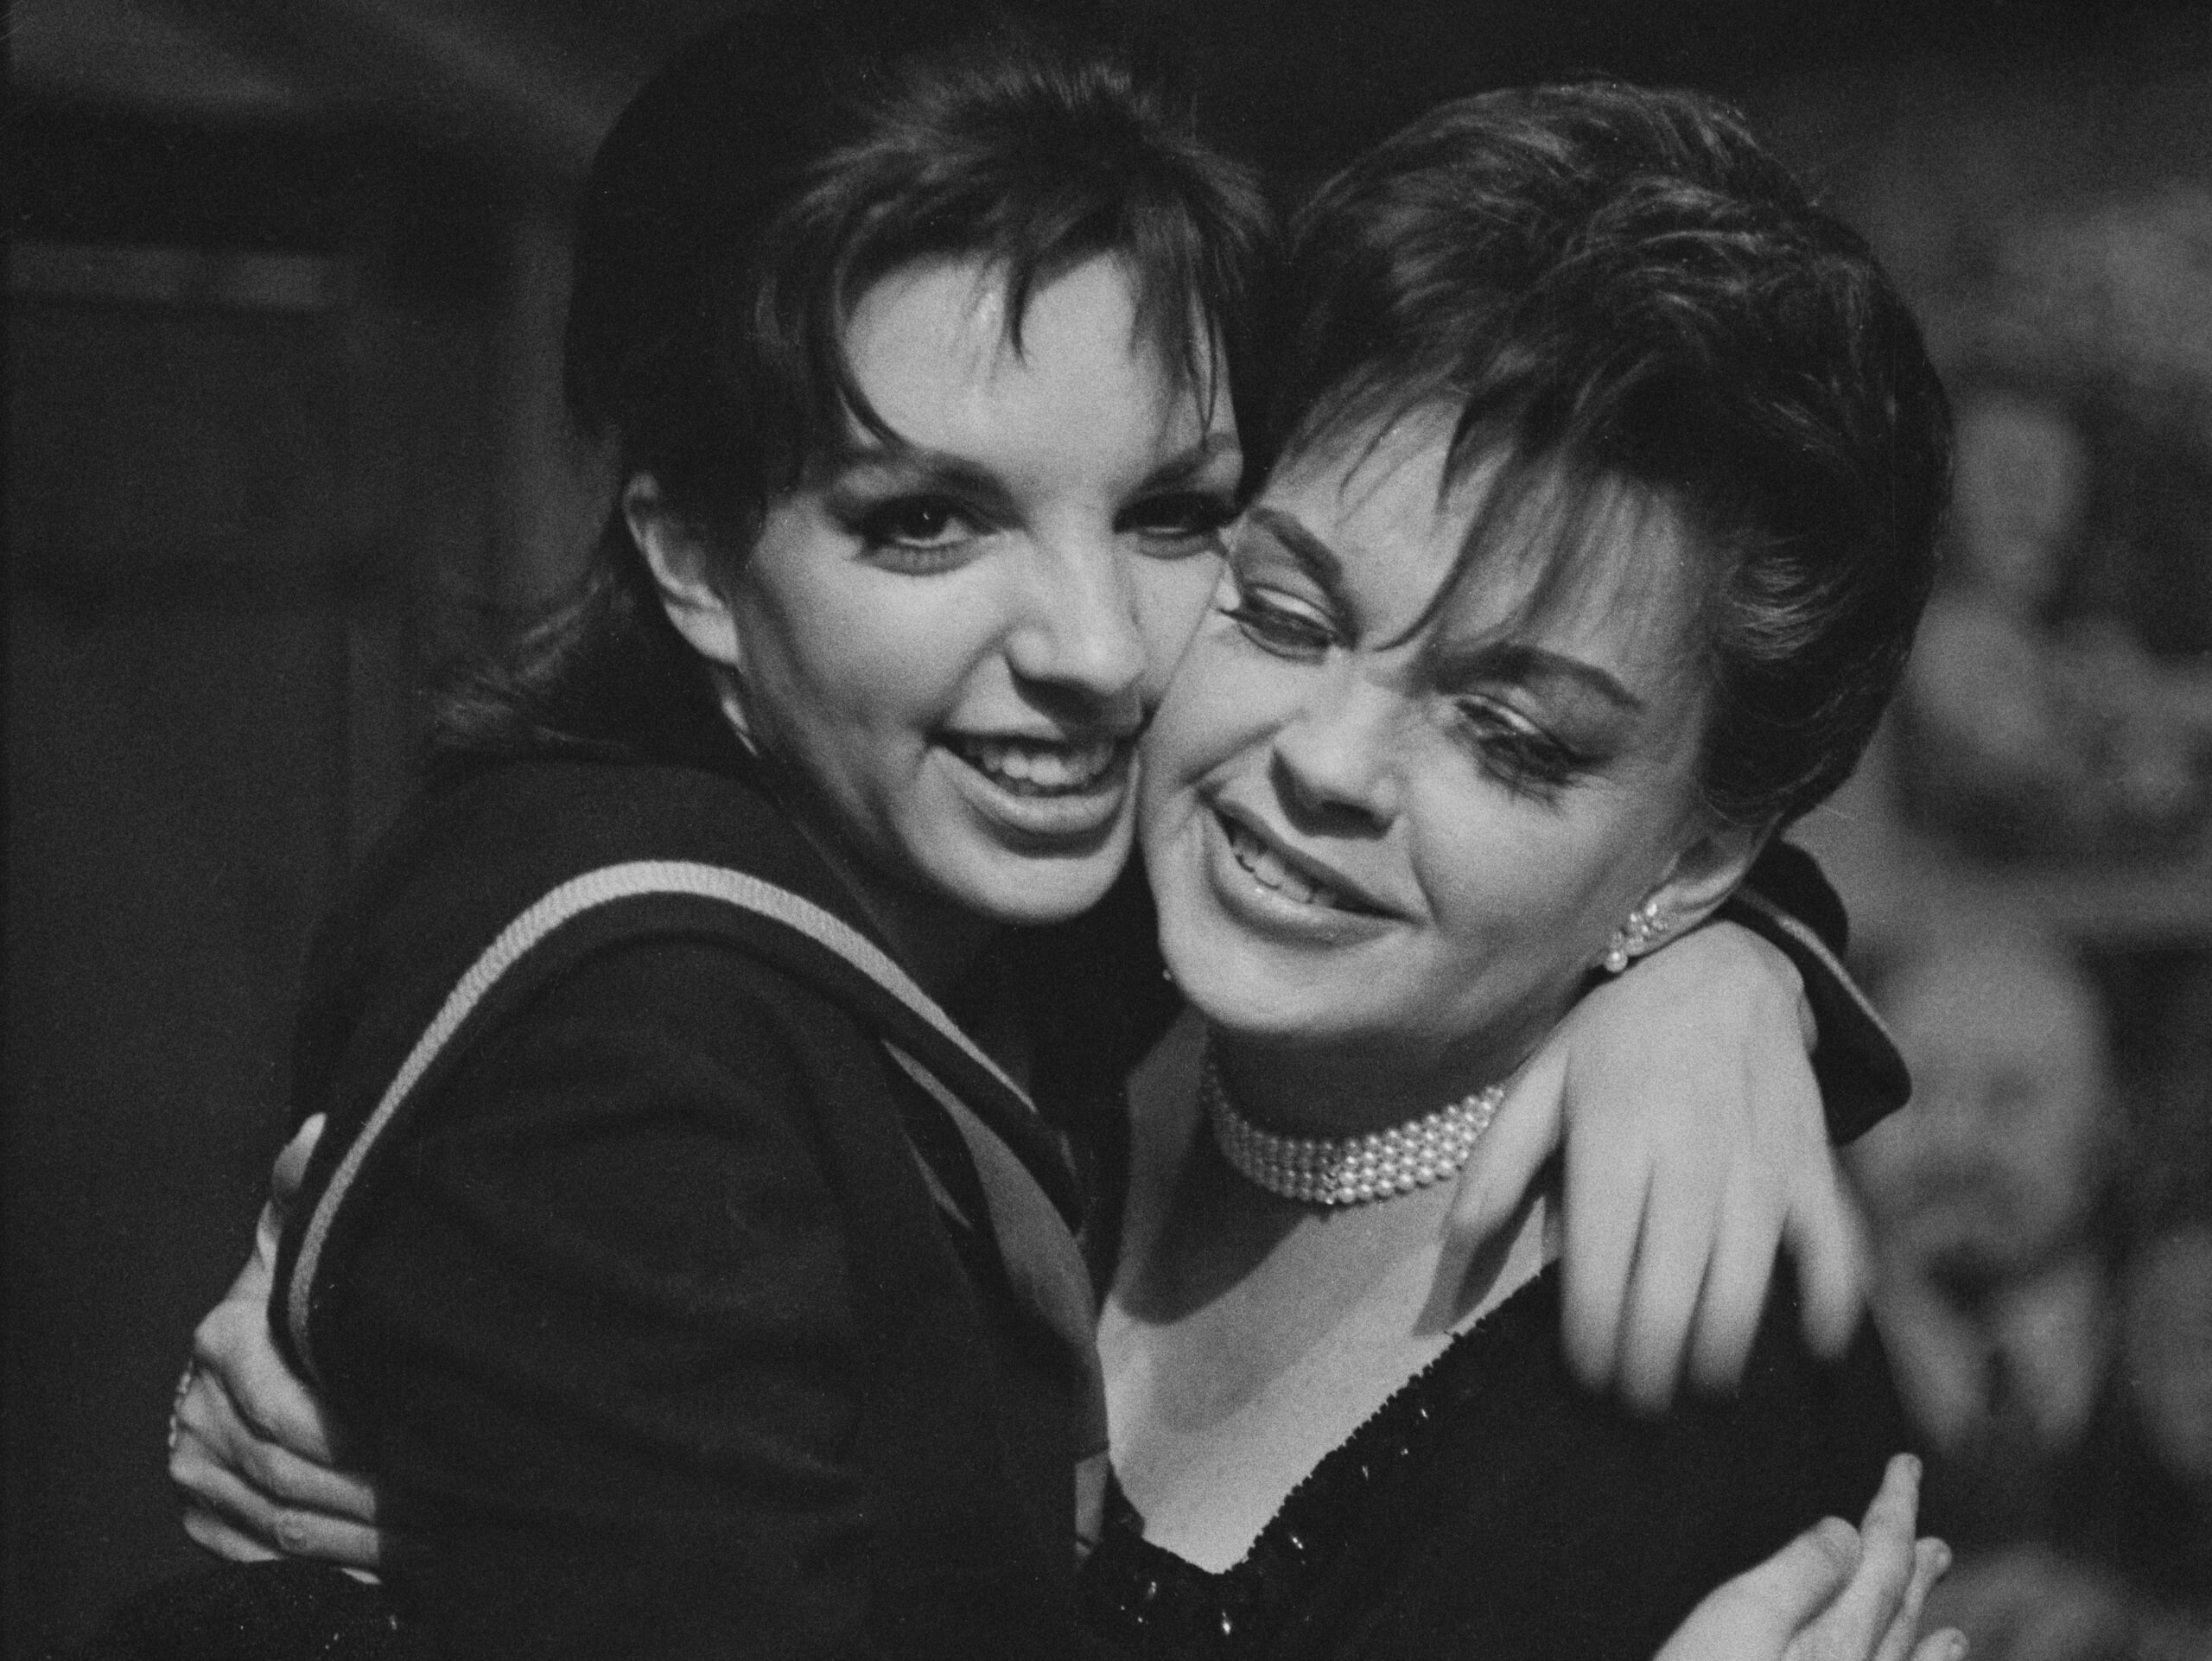 American actress and singer Liza Minnelli with her mother, American actress and singer Judy Garland, backstage at the Alvin Theatre in New York City in 1965.